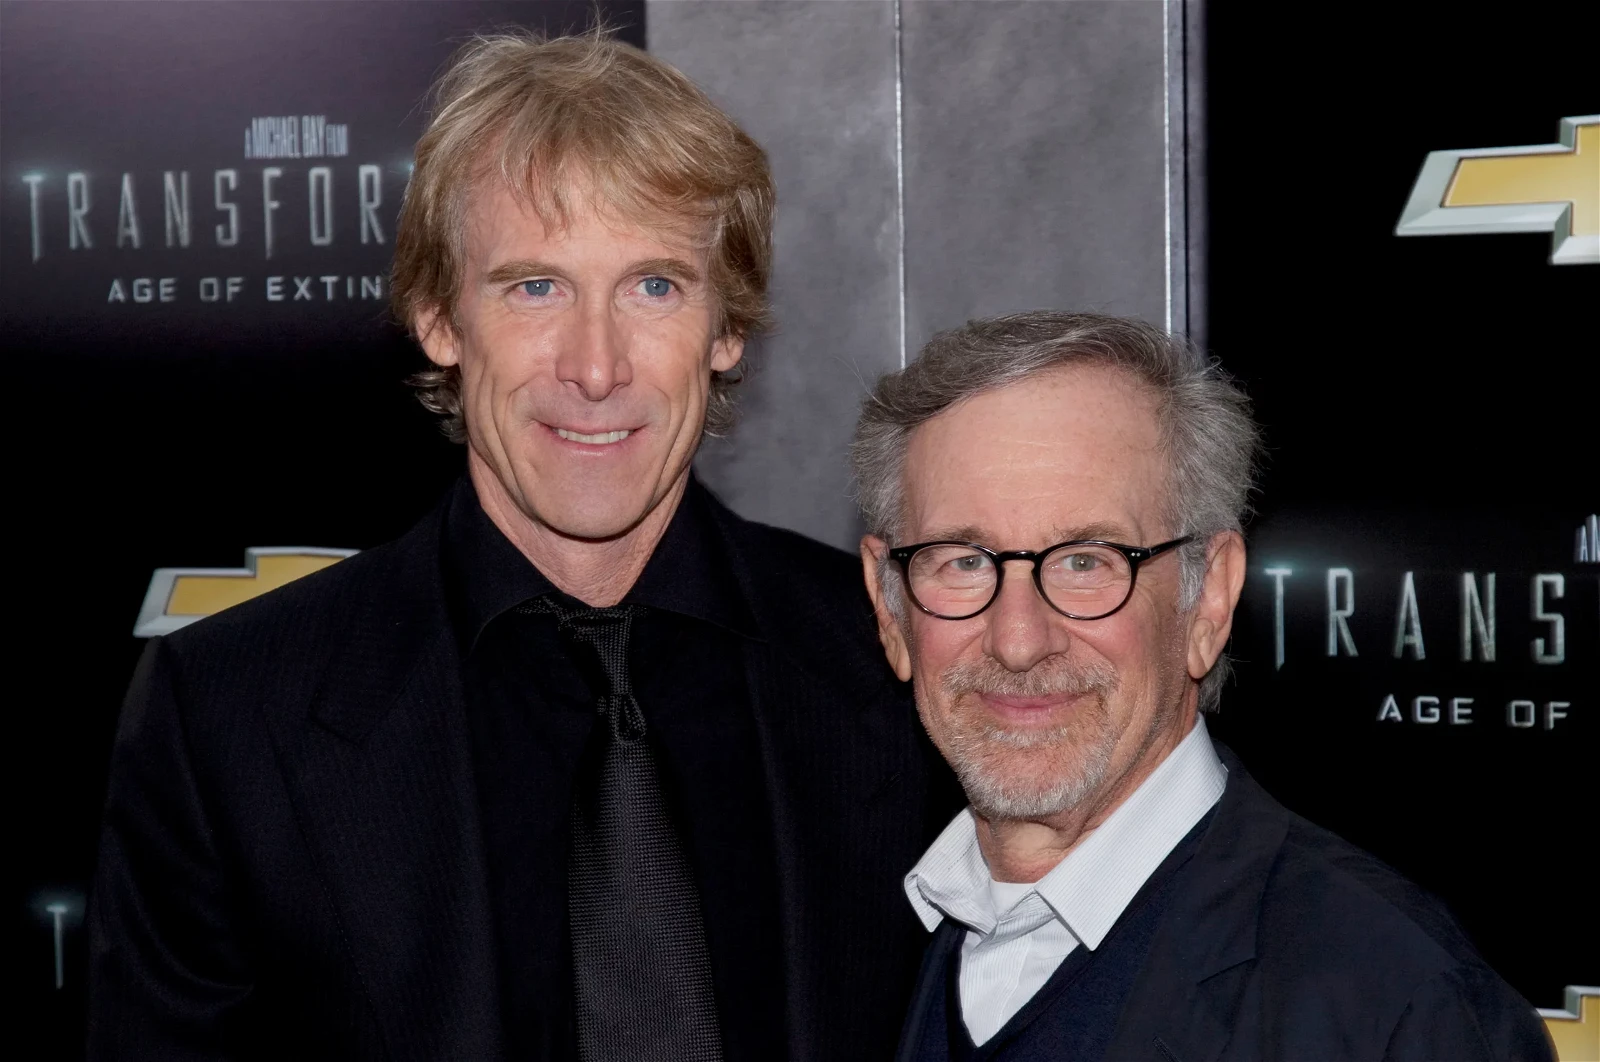 Michael Bay and Steven Spielberg